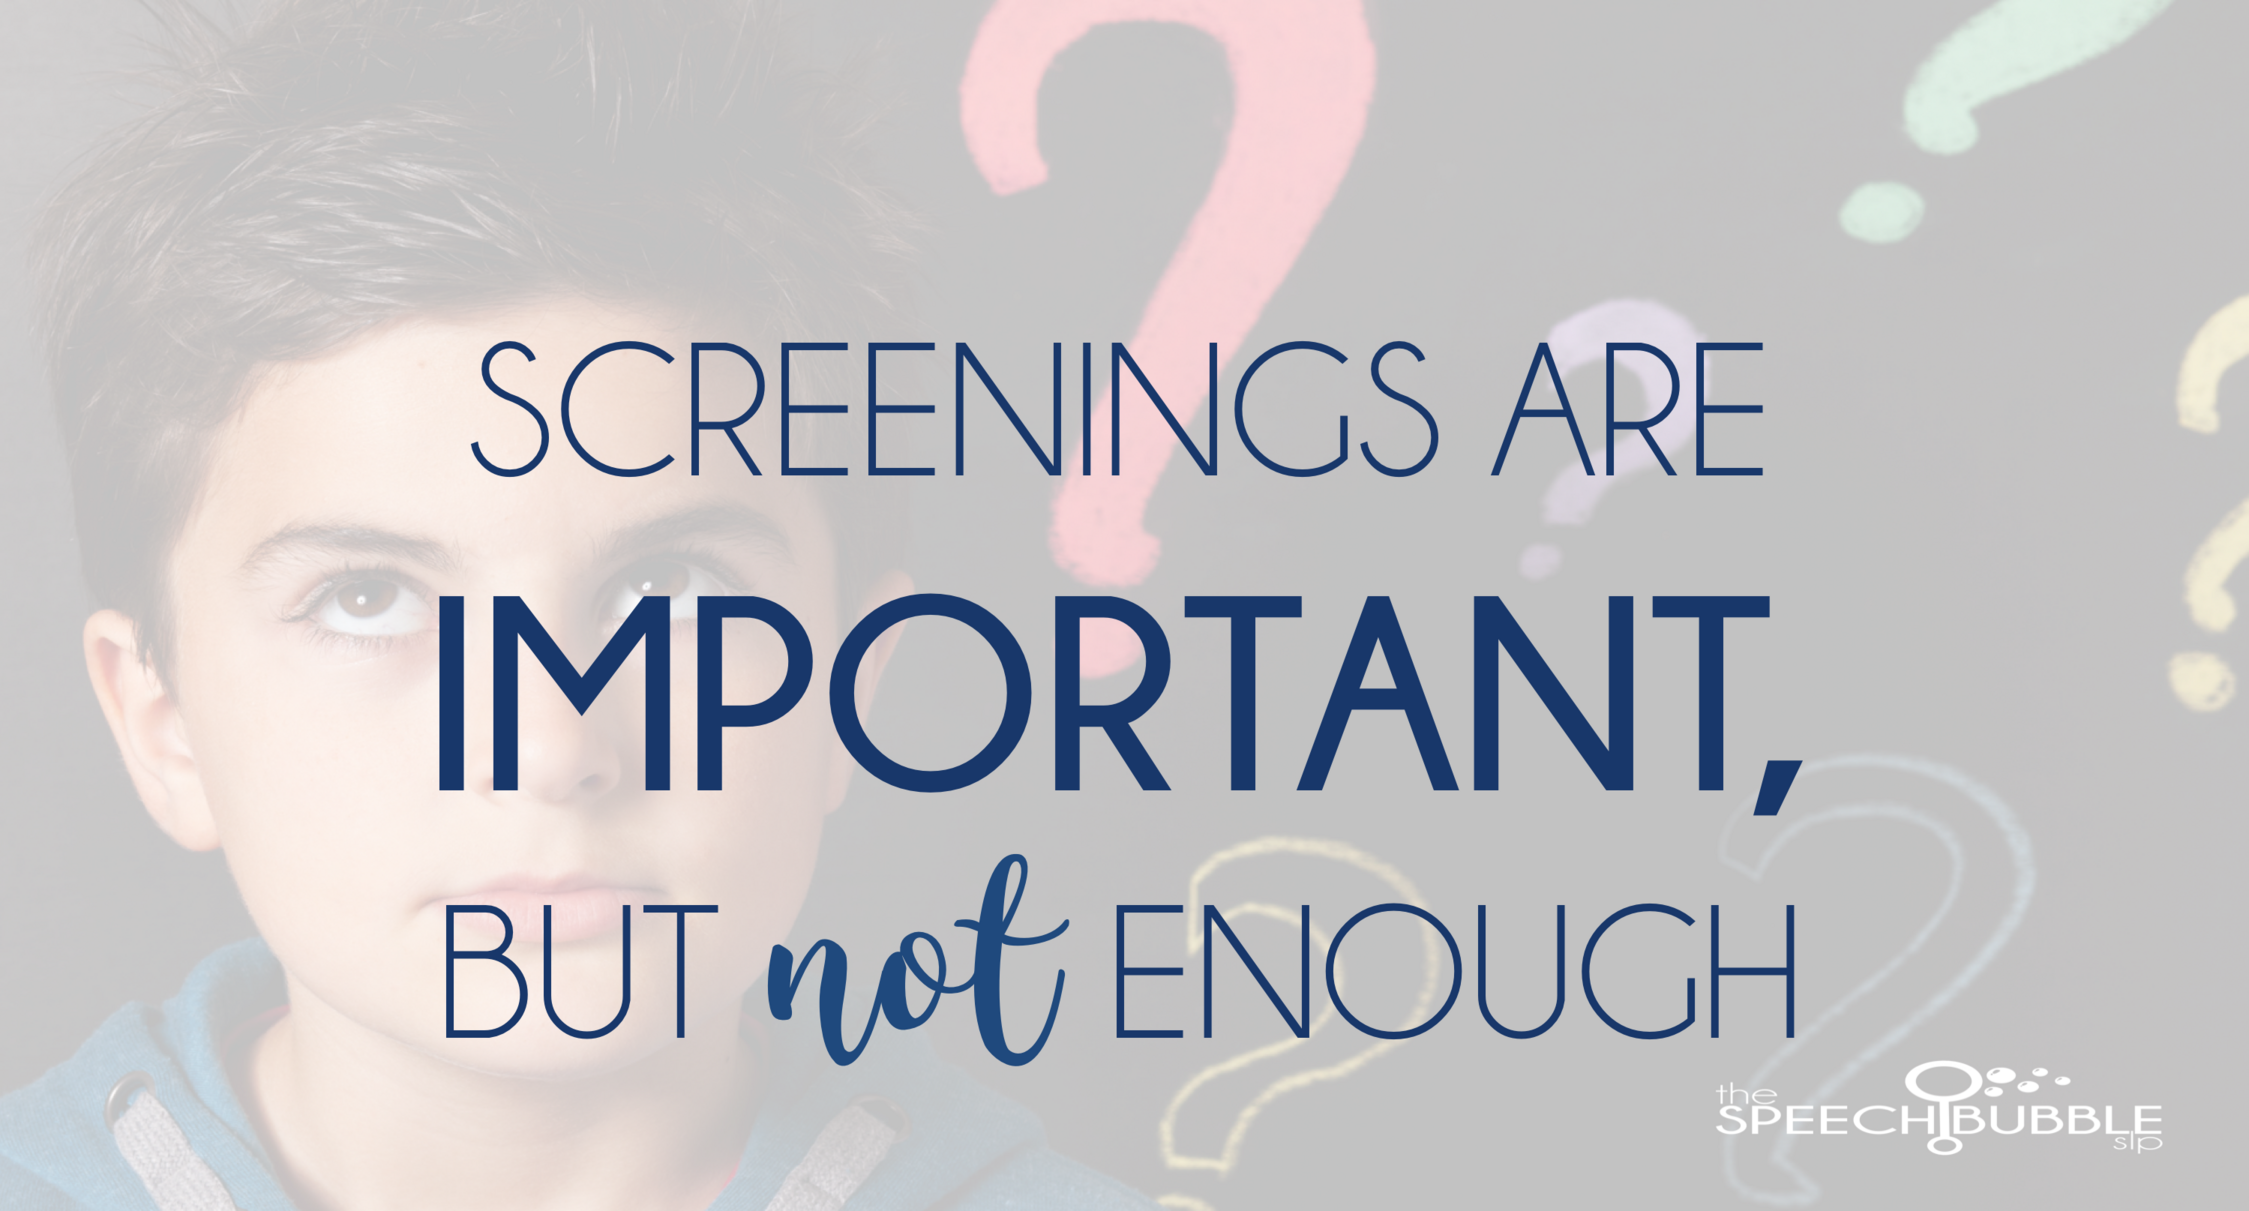 screenings are important (but not enough) the speech bubble slp